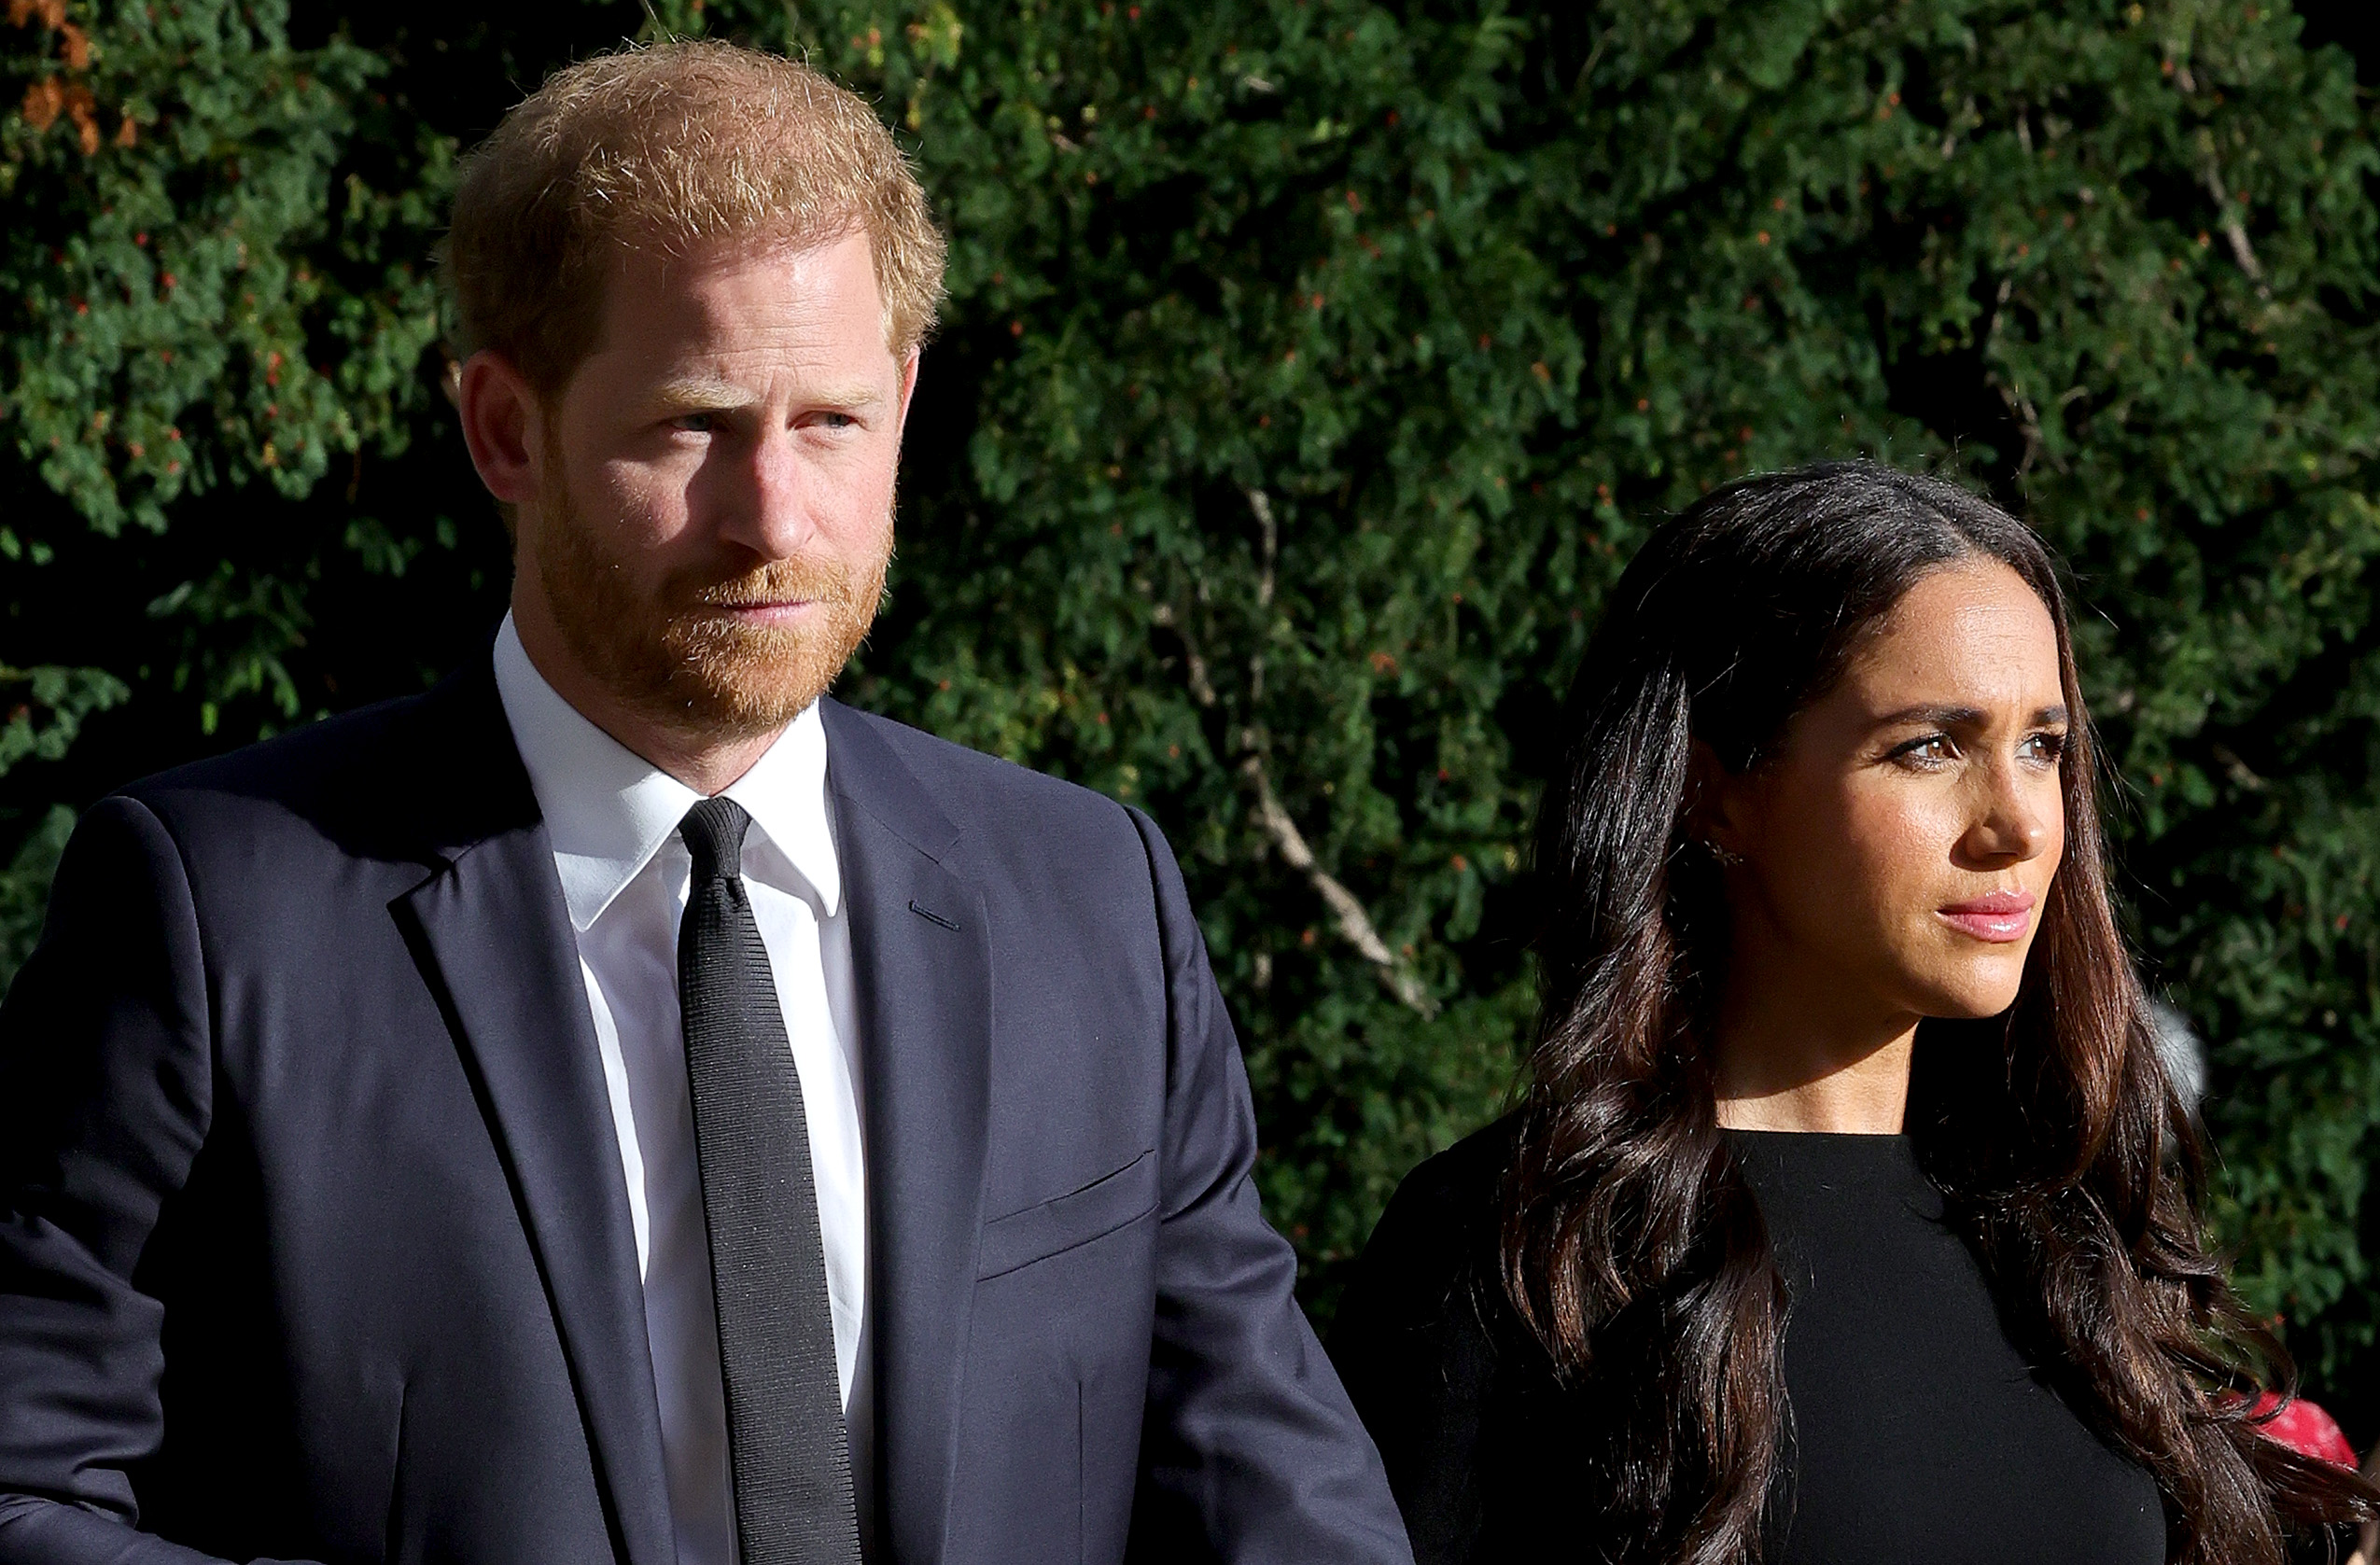 Prince Harry and Meghan Markle on the long Walk at Windsor Castle arrive to view flowers and tributes to HM Queen Elizabeth on September 10, 2022 in Windsor, England | Source: Getty Images